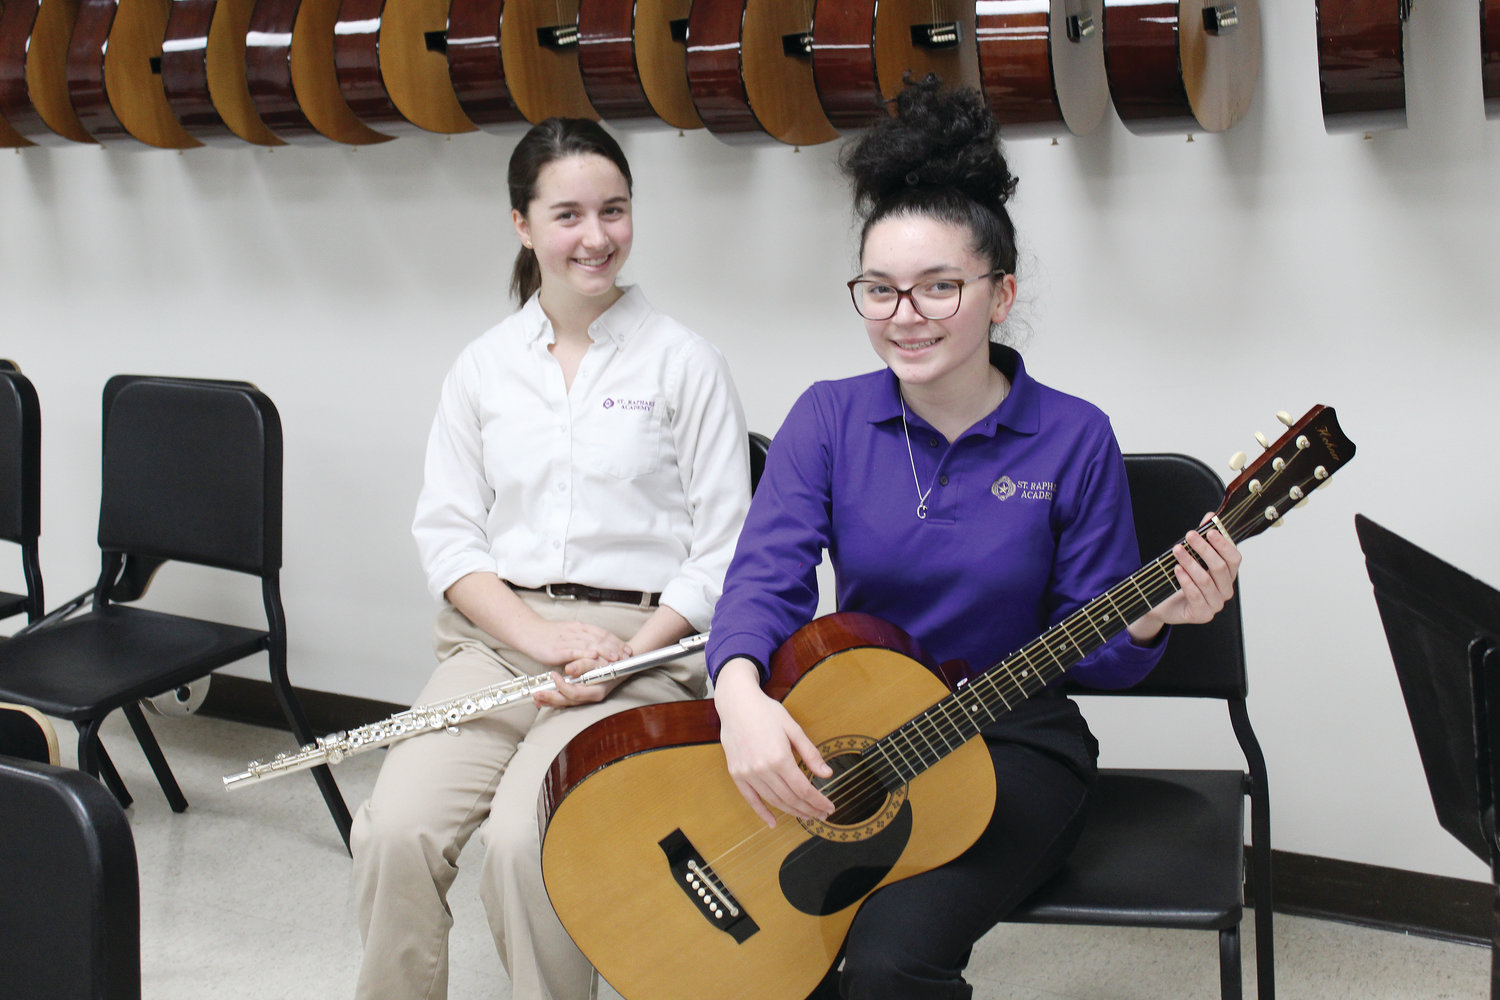 Two students from St. Raphael Academy in Pawtucket were chosen as All-State Musicians. Adelina Steinmetz, at left,  was selected to play flute in the senior division orchestra, and junior Camille Santos, was chosen for the senior division guitar ensemble.